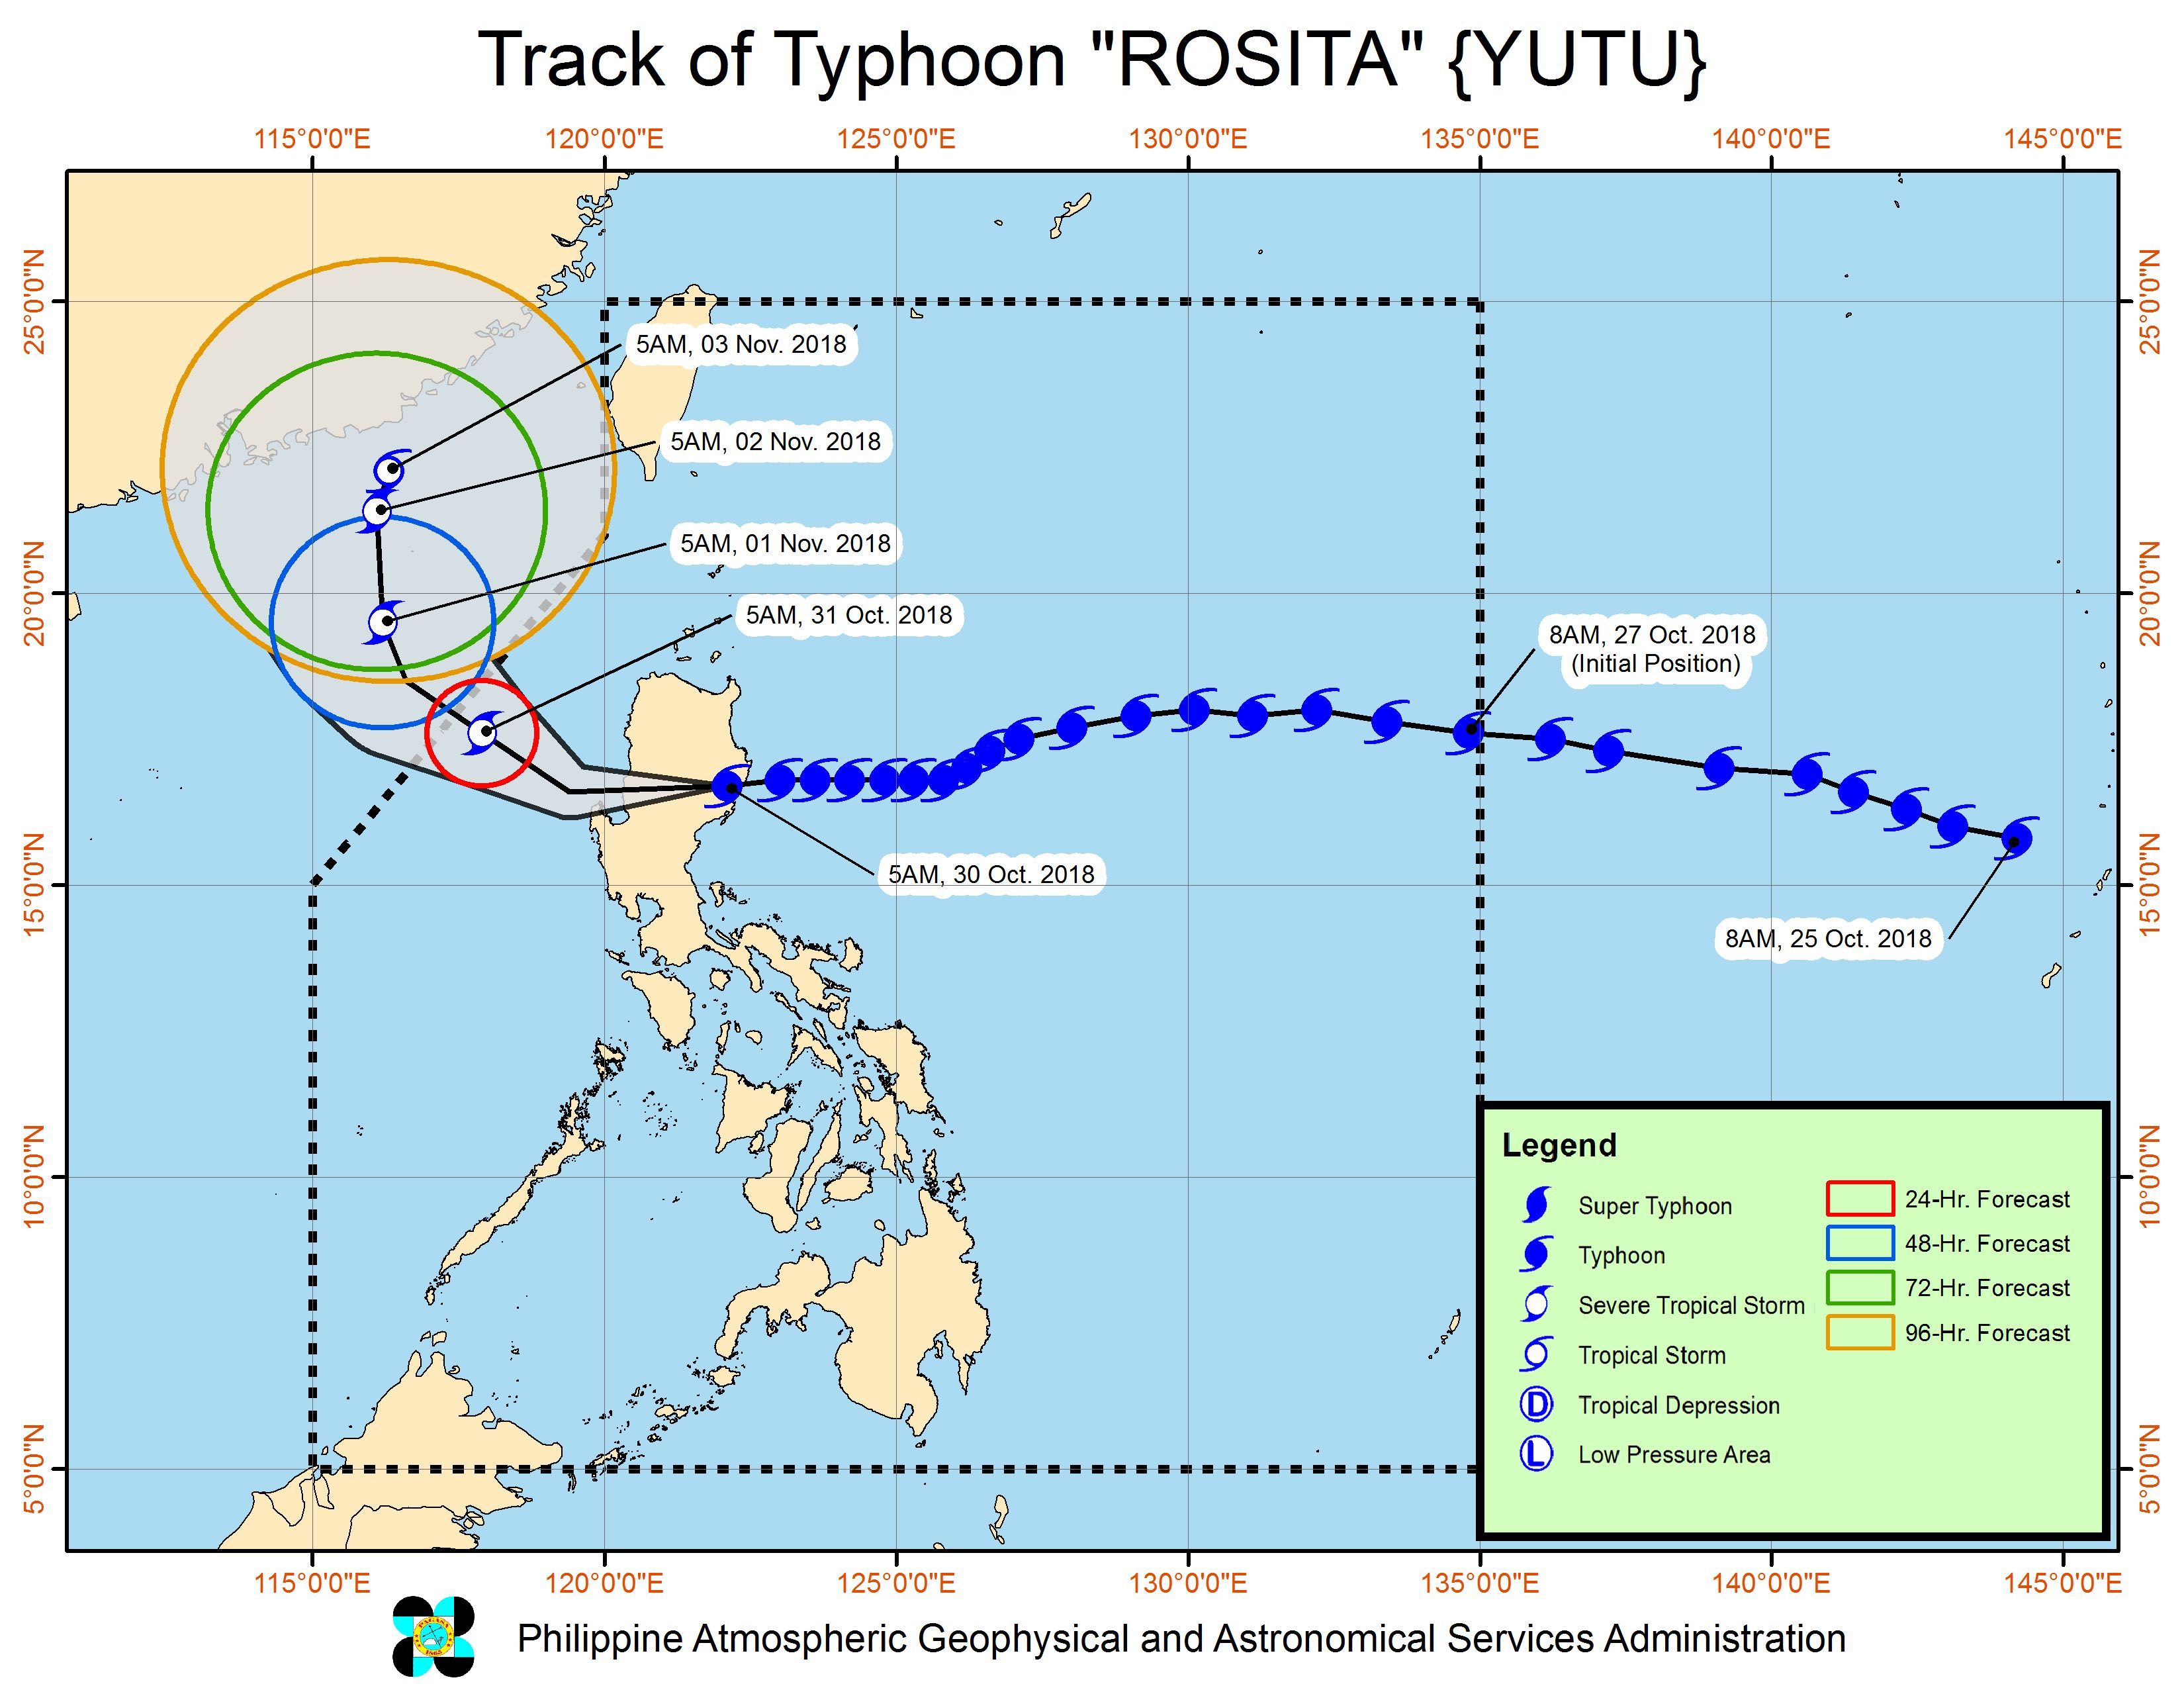 Forecast track of Typhoon Rosita (Yutu) as of October 30, 2018, 8 am. Image from PAGASA 